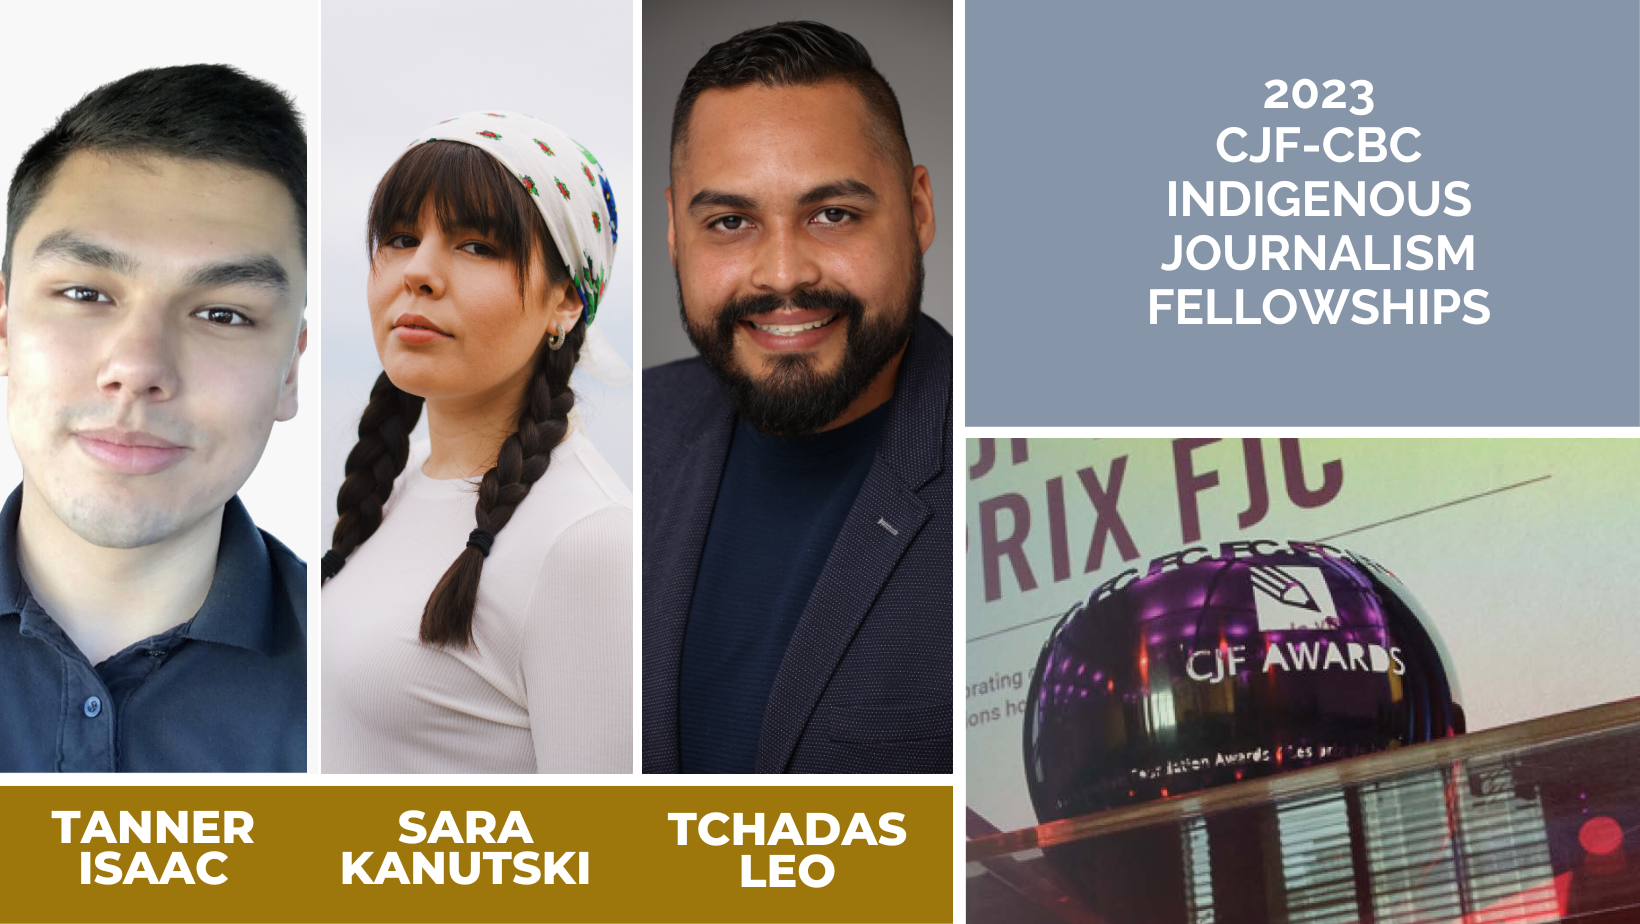 Banner showing photos and names of the 2023 CJF-CBC Indigenous Journalism Fellowships. The photos are shown in a grid of tall, narrow rectangles. To the left is Tanner Isaac, a young Indigenous man with short dark hair, wearing a blue button-down shirt. In the centre is a portrait of Sara Kanutski, a young Indigenous woman with brown hair in two braids and bangs. She is wearing a white bandanna on her head and a white shirt. The rightmost photo show Tchadas Leo, a smiling Indigenous man with short dark hair and a moustache and beard.